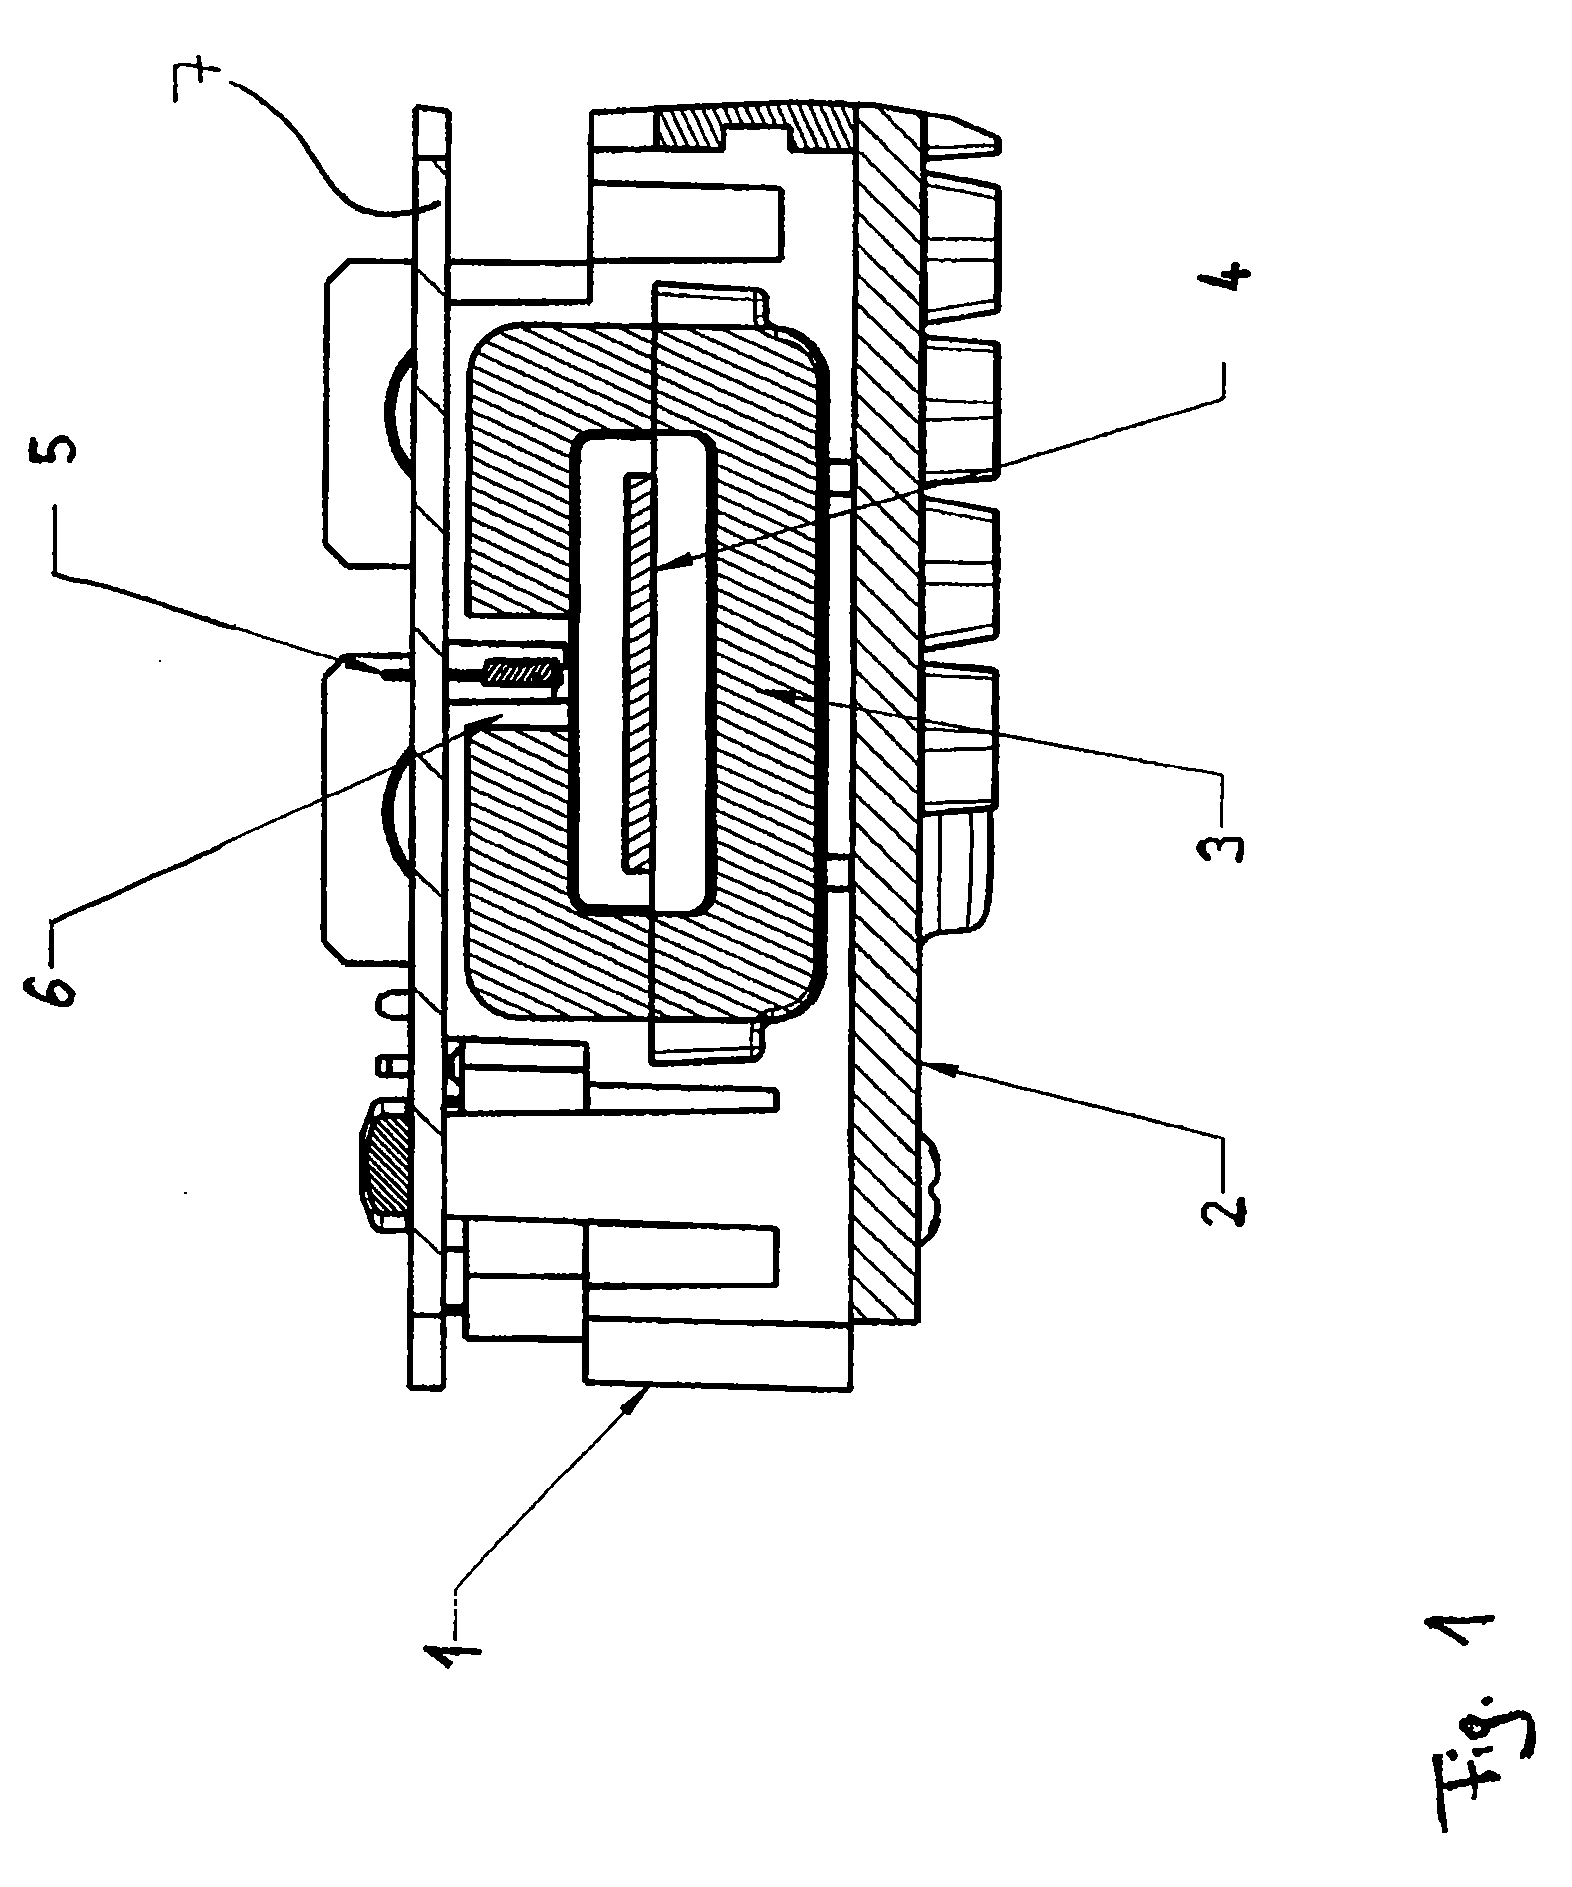 Current measuring device by means of magnetically sensitive sensor for a power electronics system